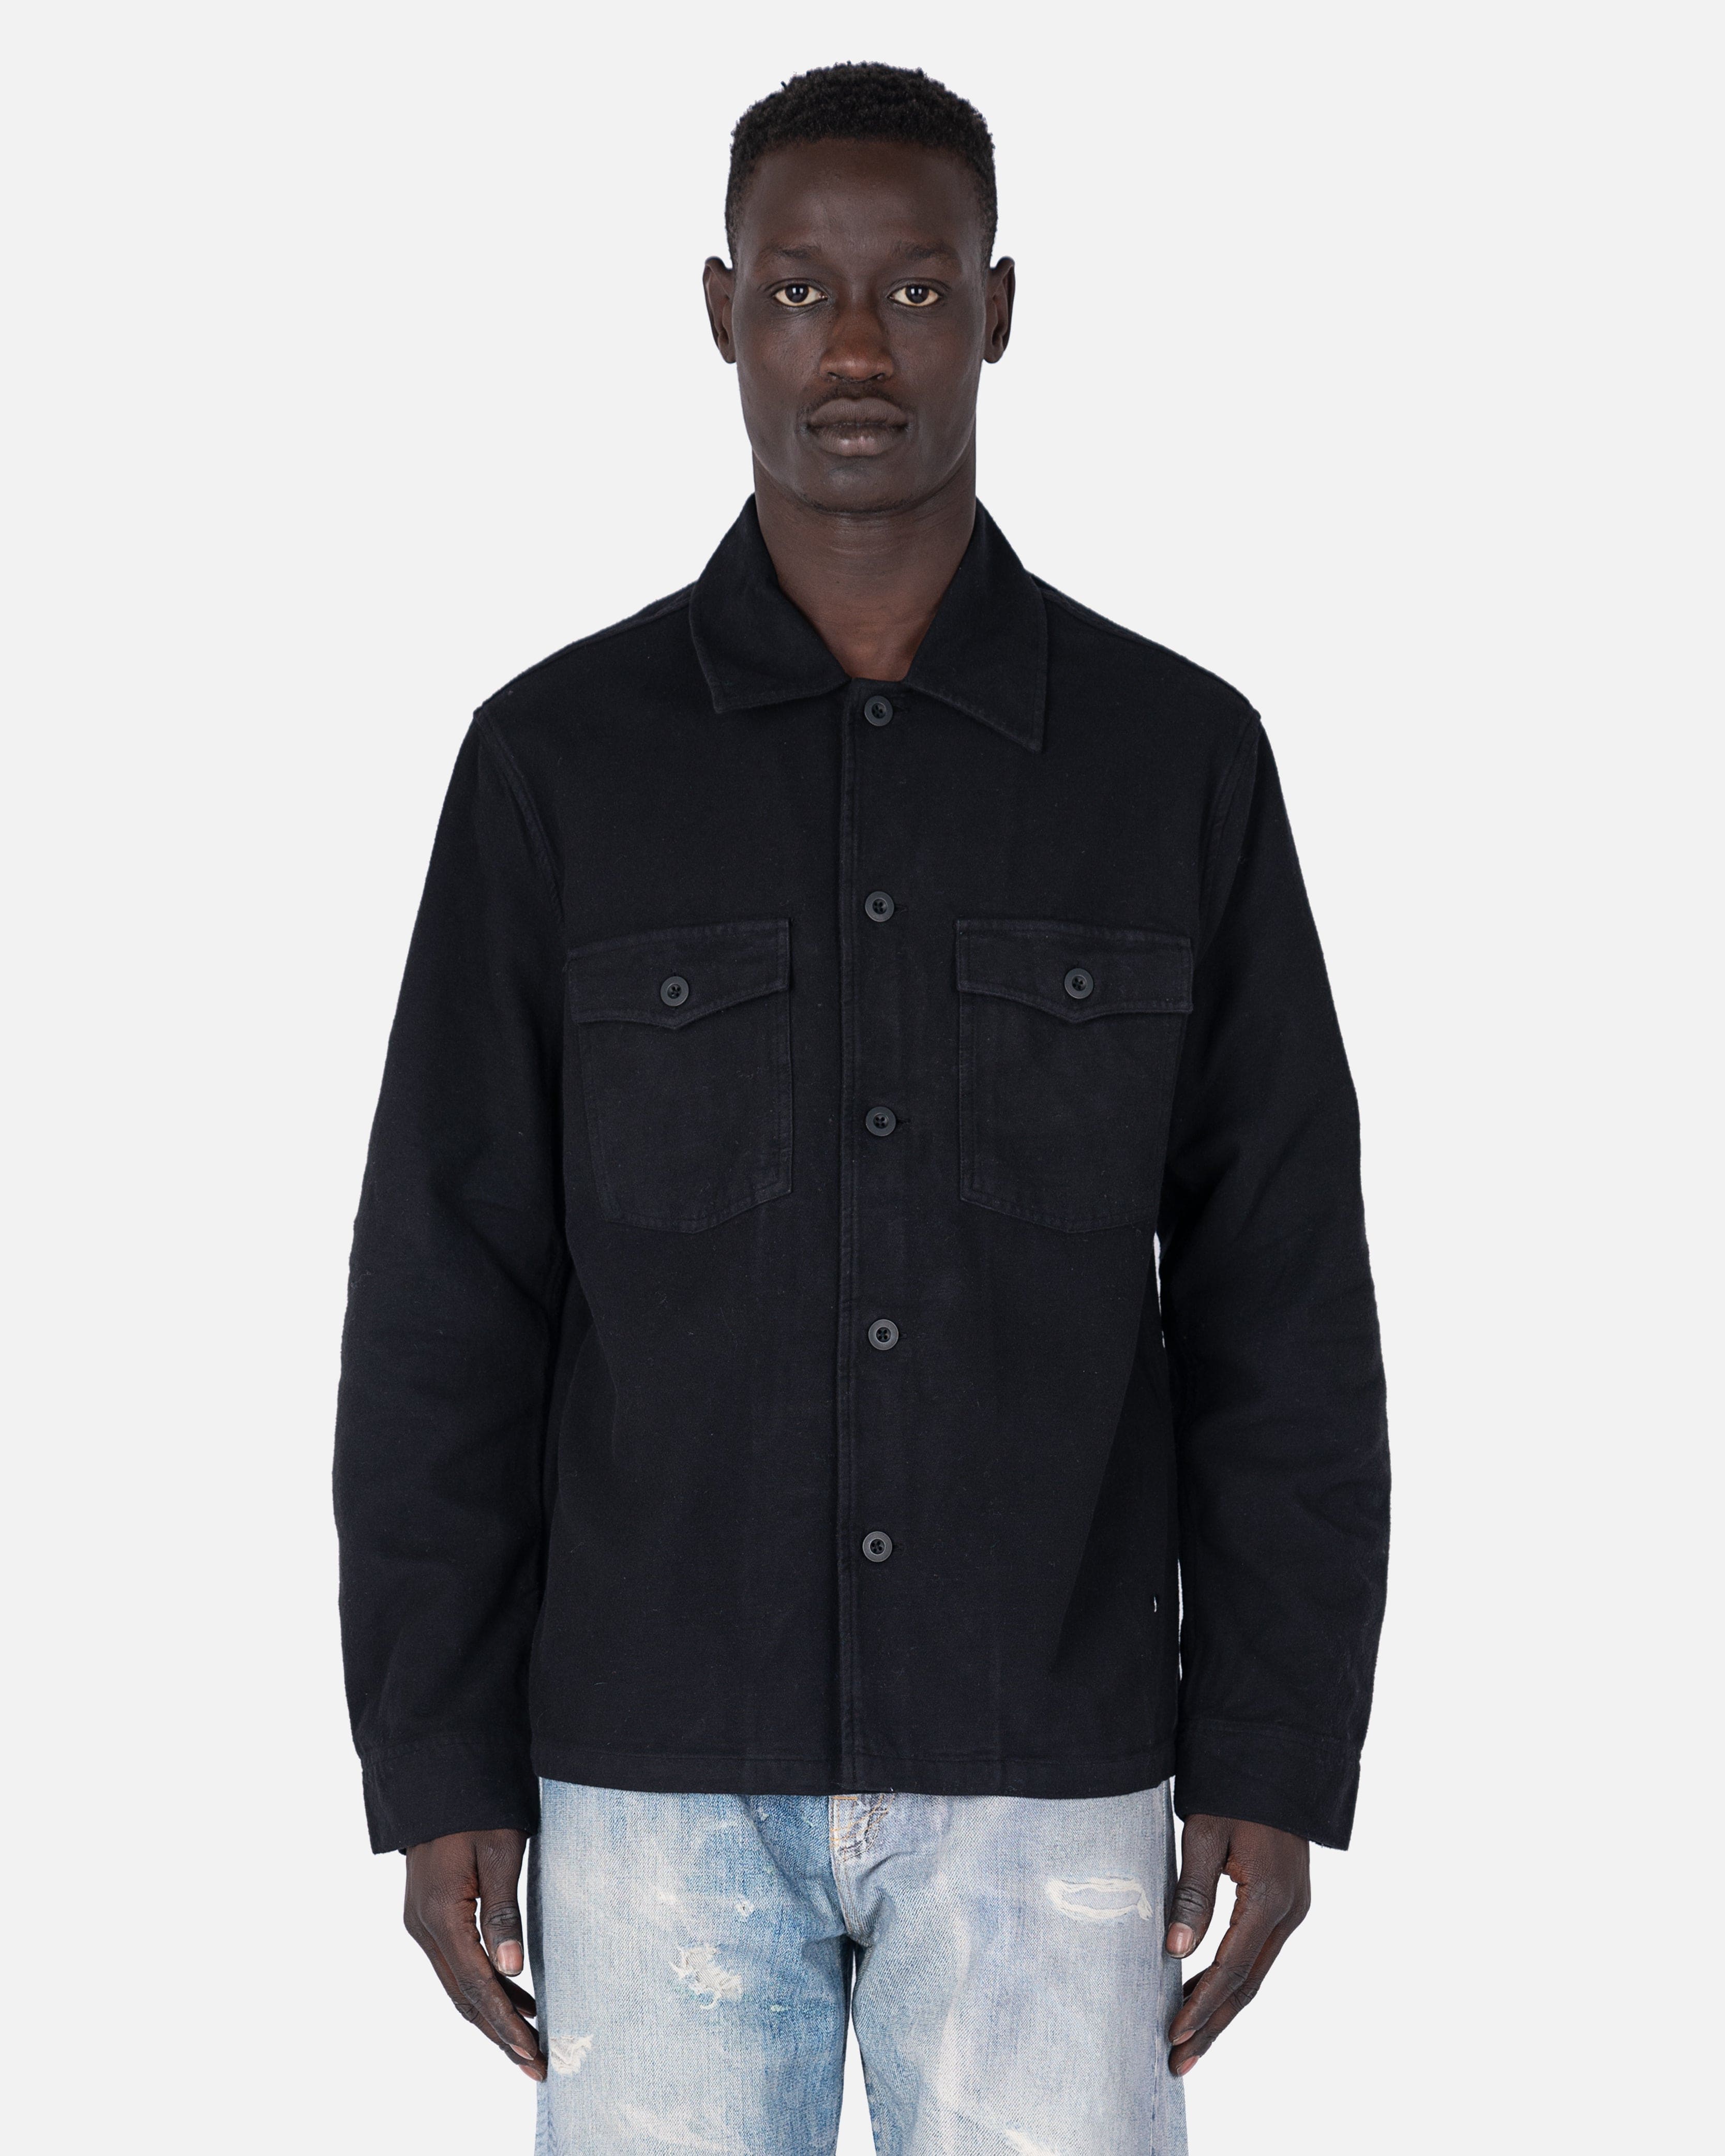 Evening Coach Jacket in Black Brushed Cotton